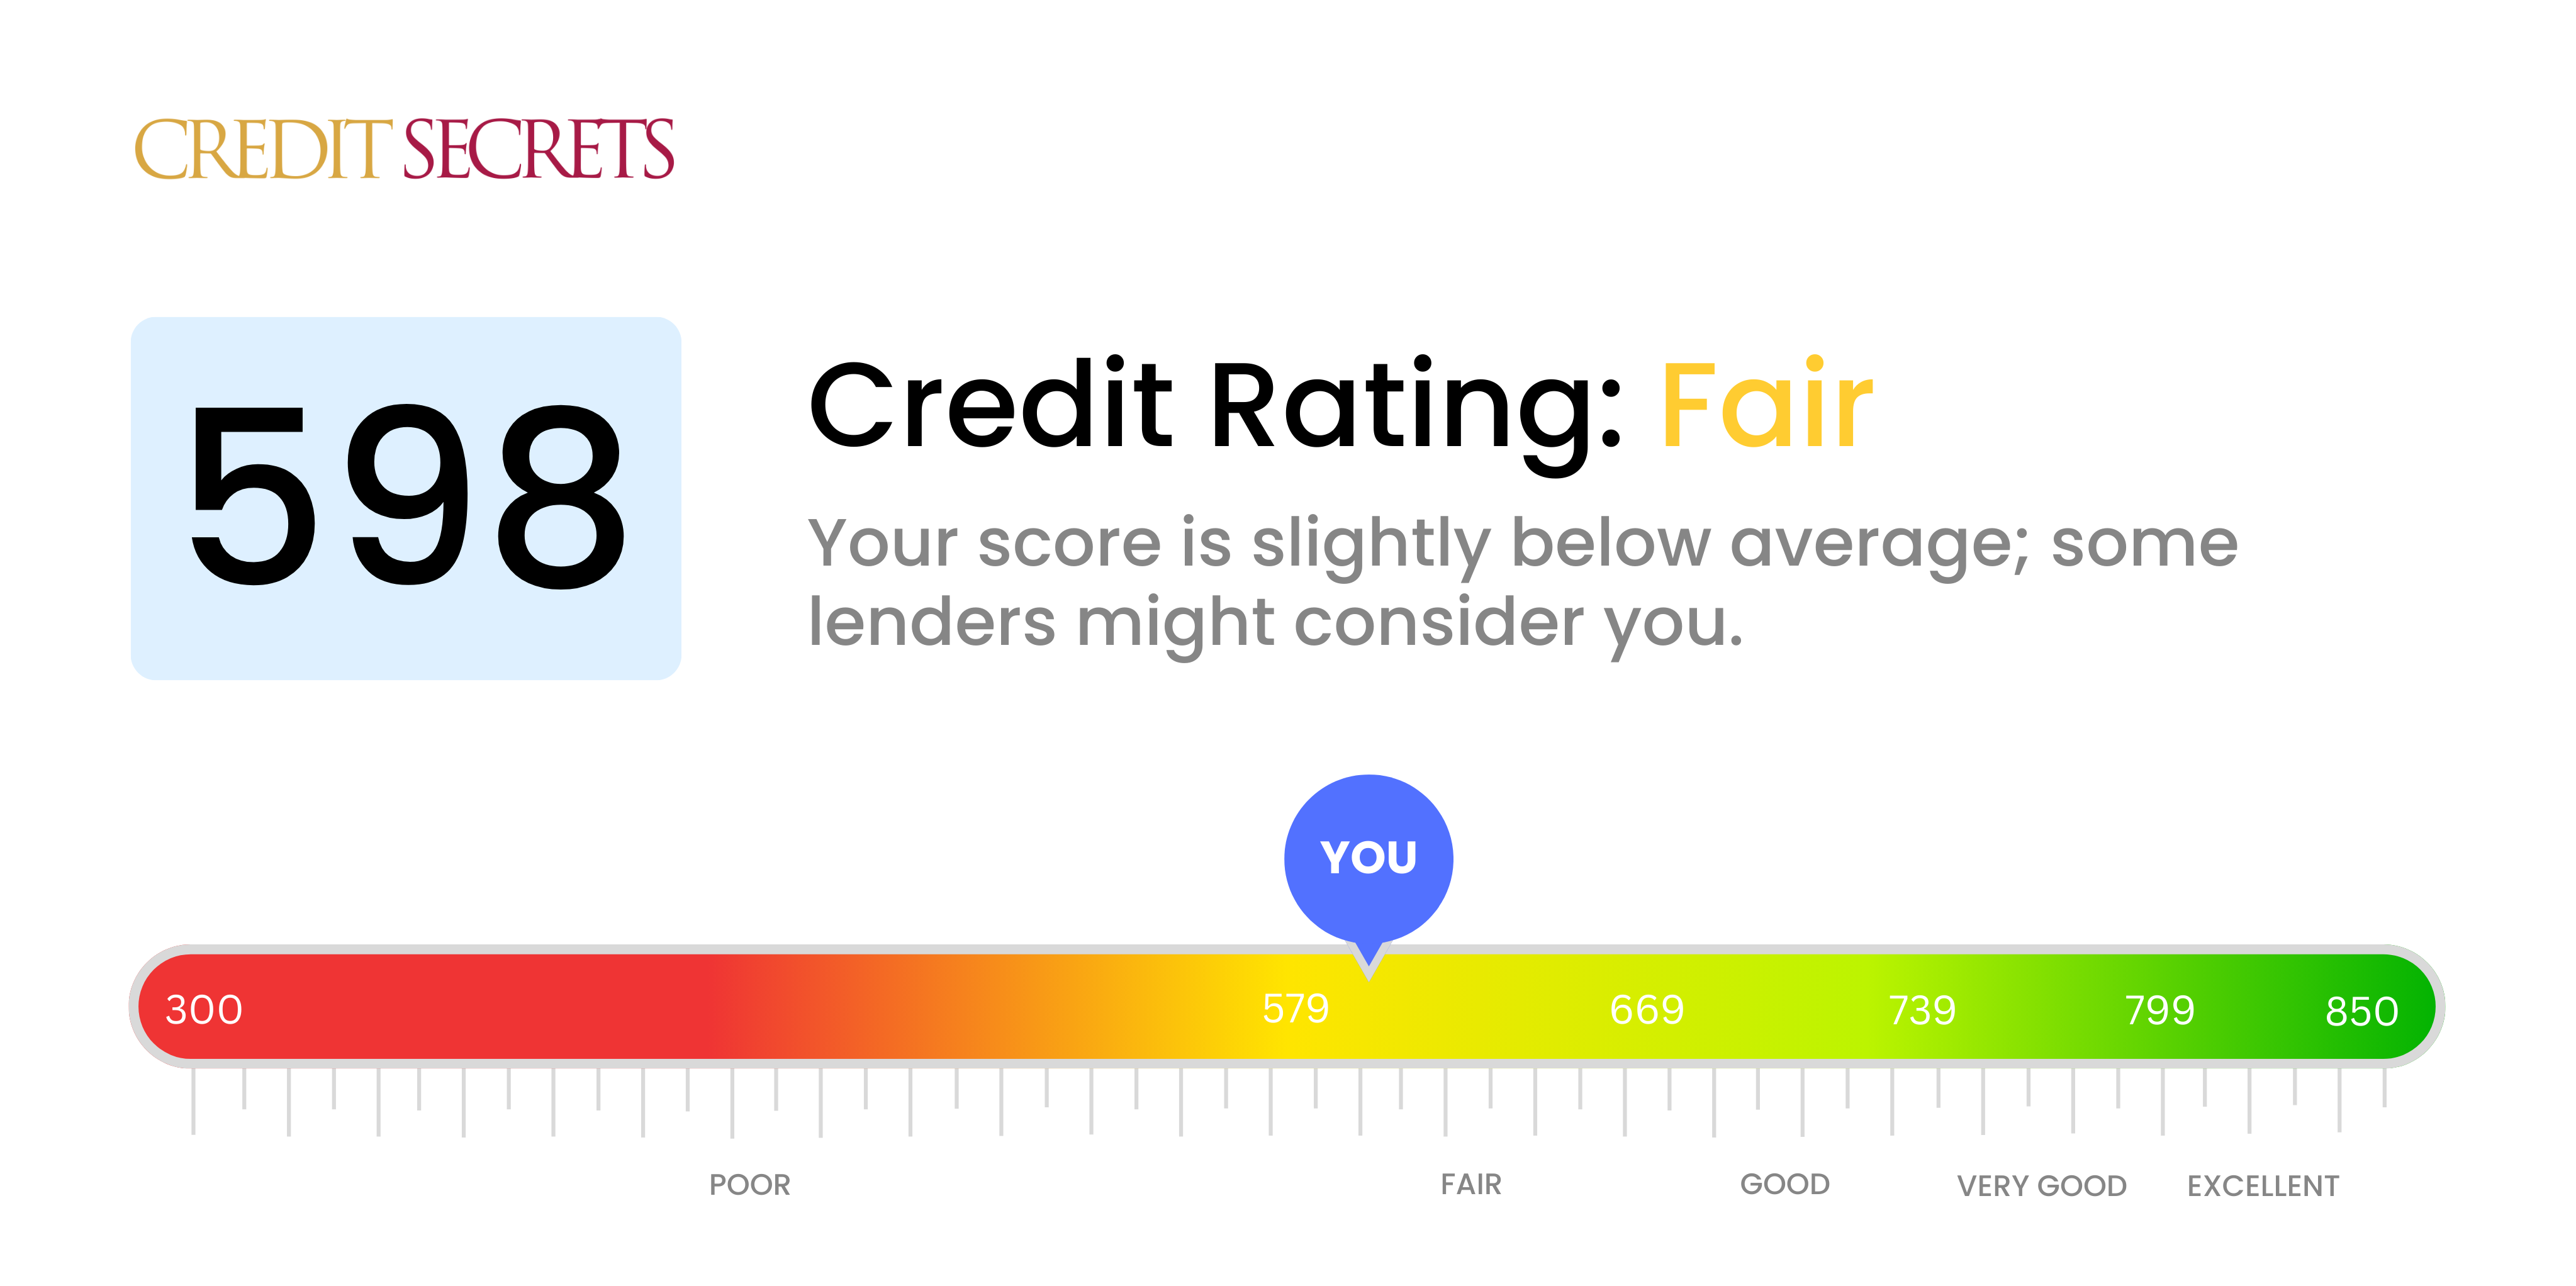 Is 598 a good credit score?